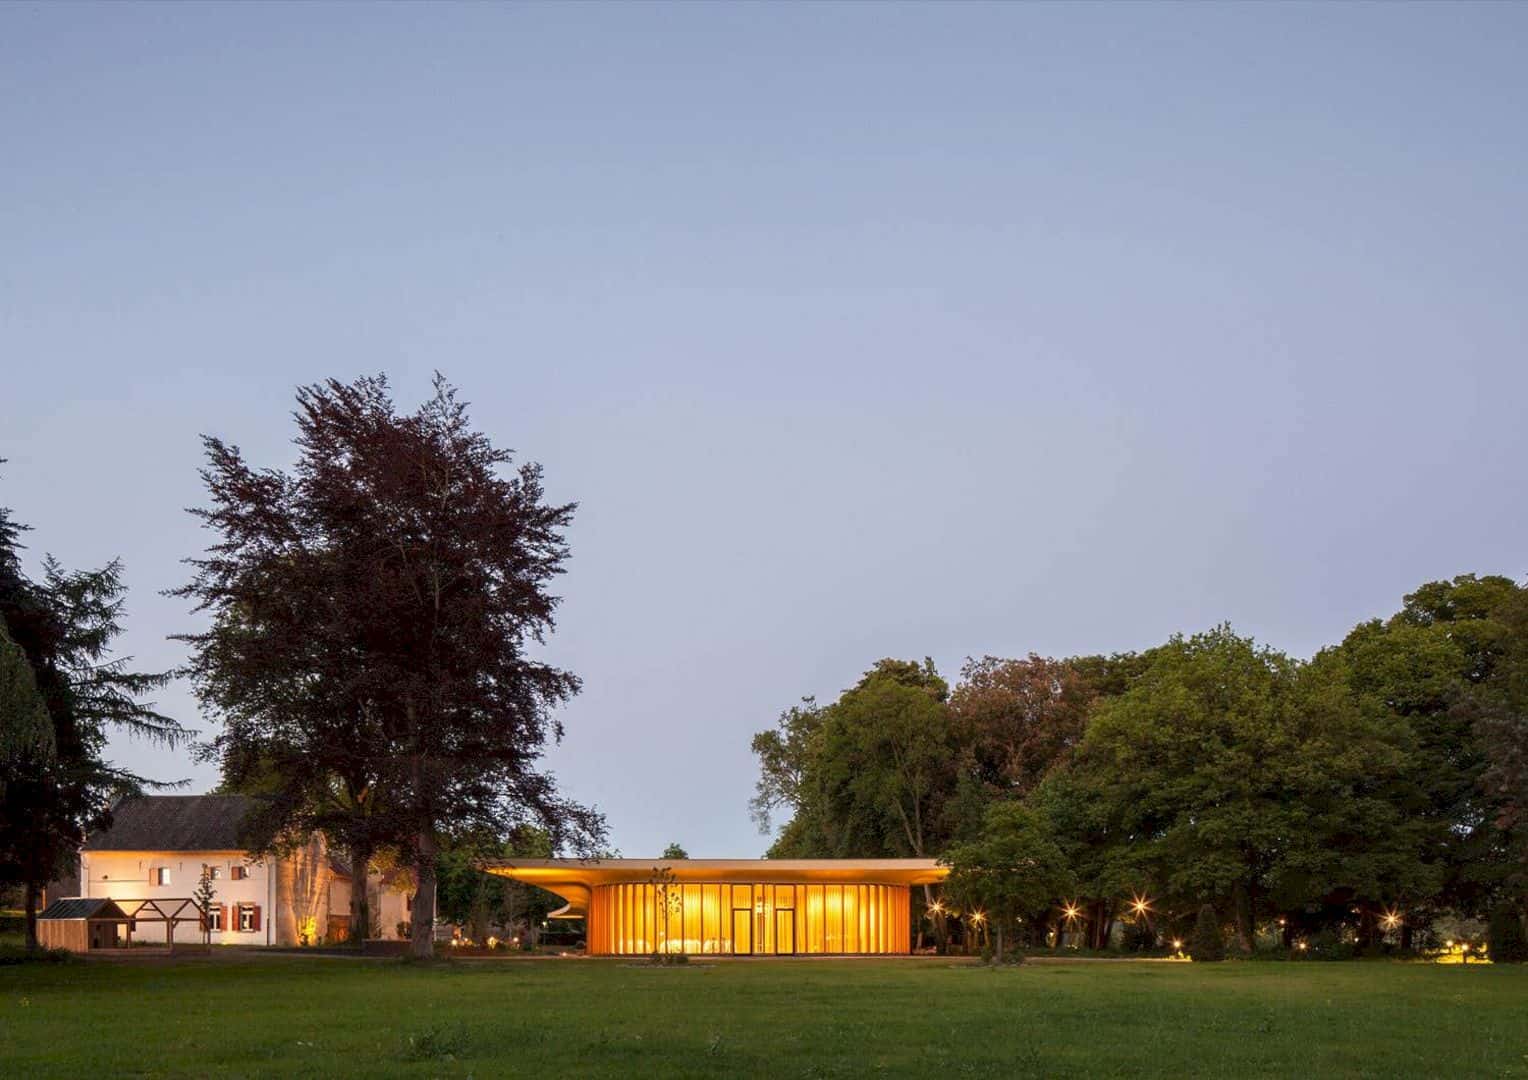 St Gerlach Pavilion Manor Farm An Elegant Pavilion To Complement Historic Buildings In Hilly Limburg Countryside 10